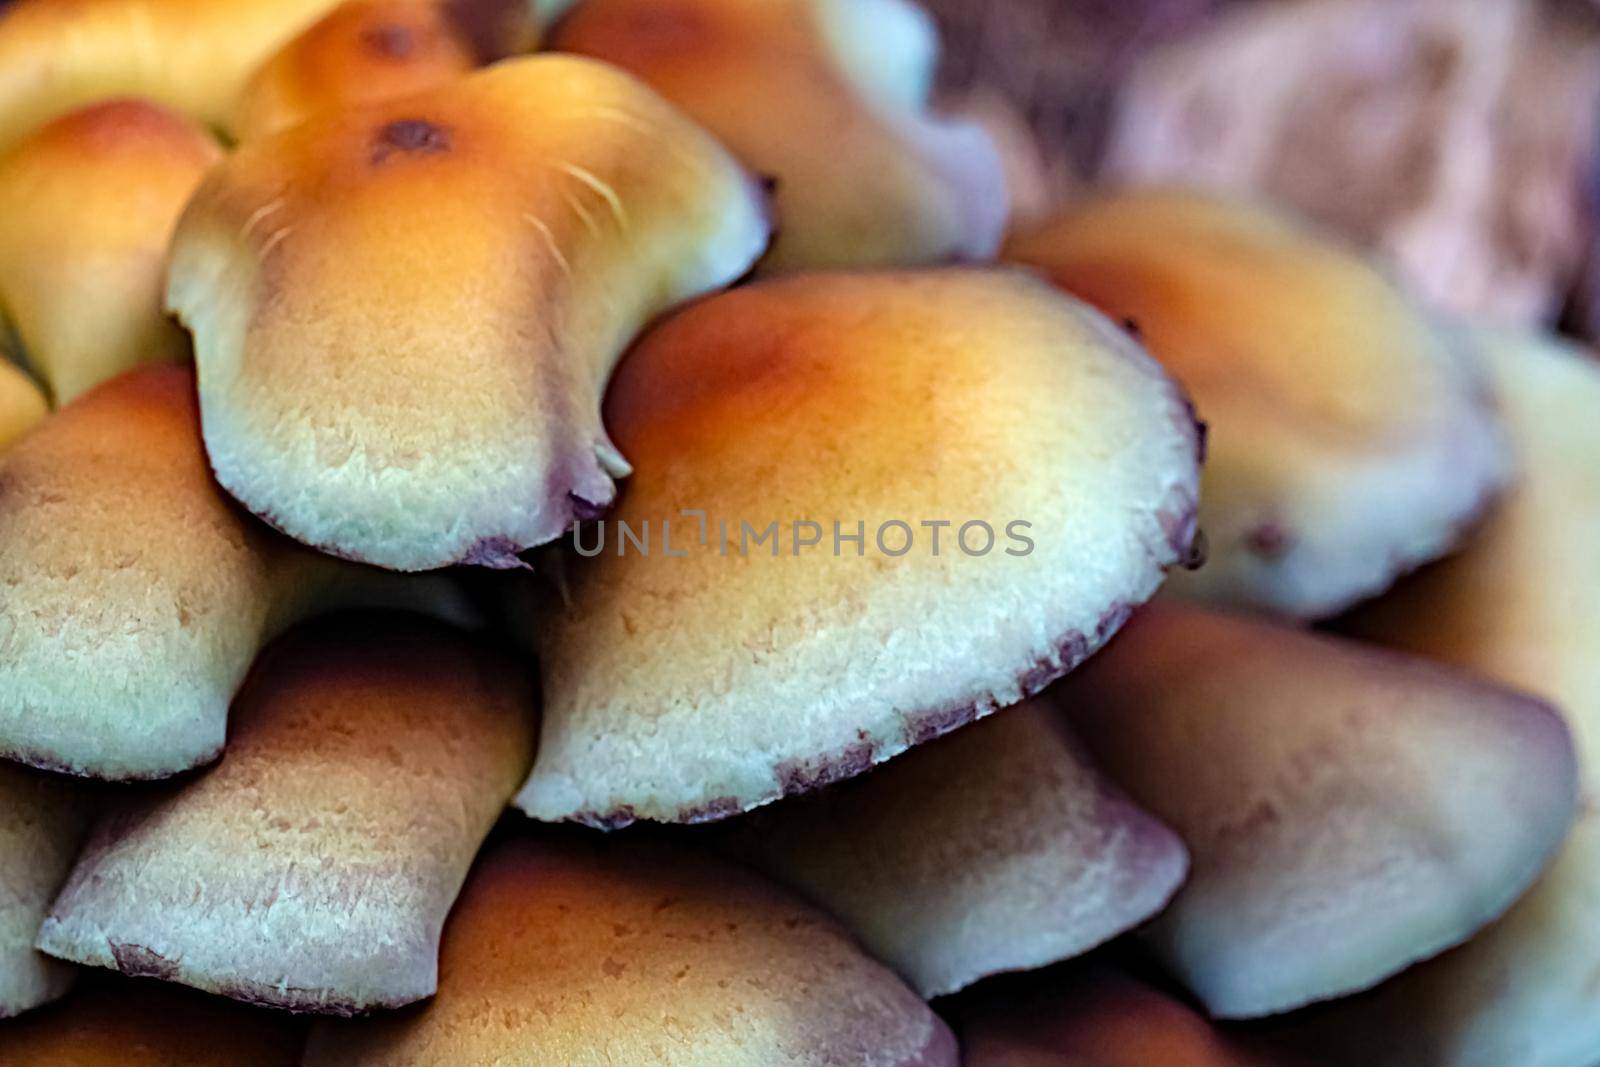 Orange inedible poisonous mushrooms in the forest by clusterx